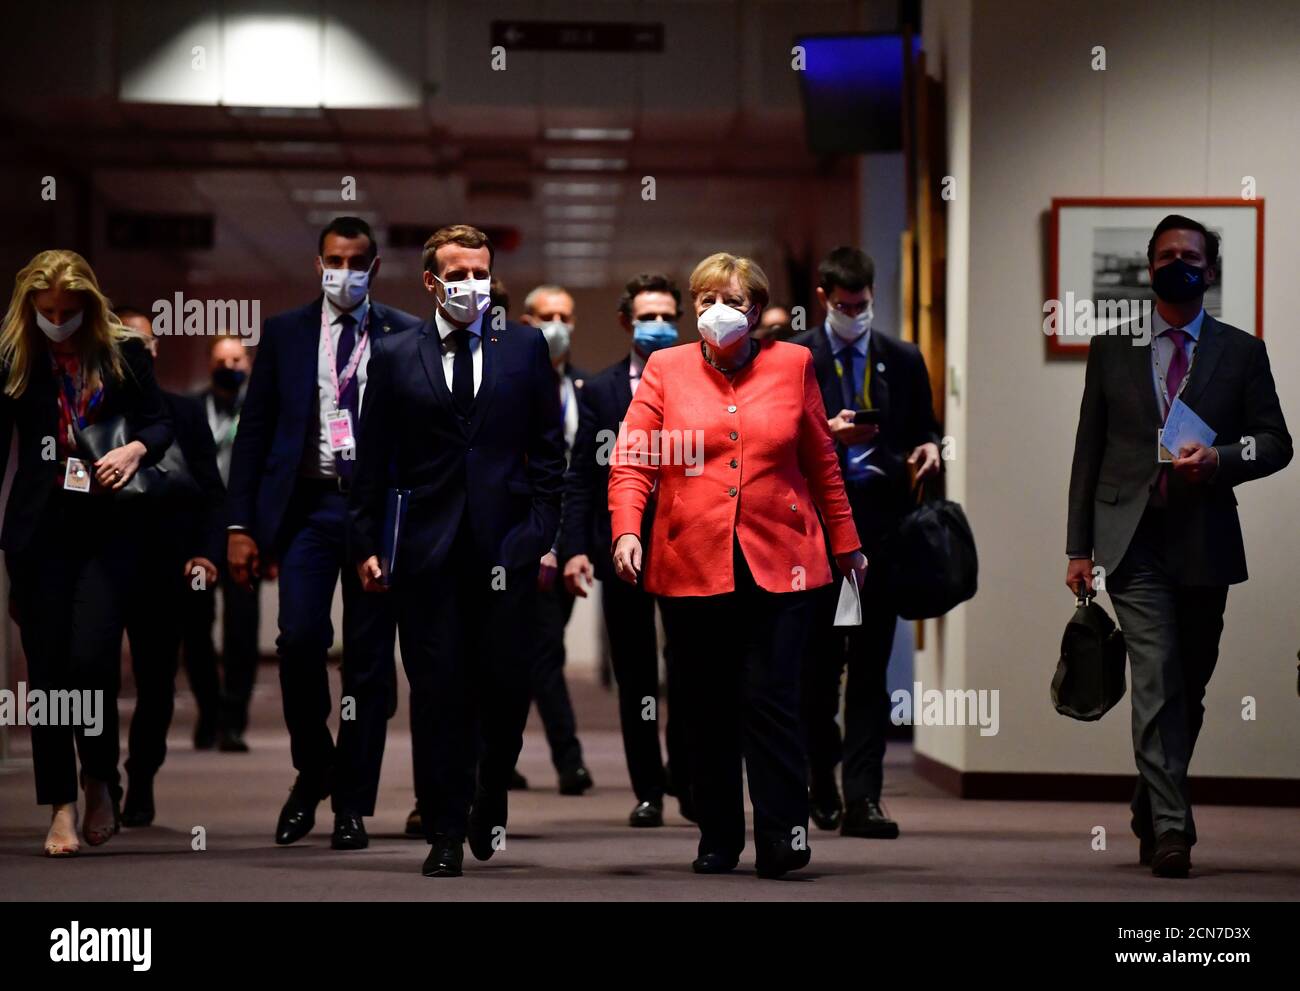 German Chancellor Angela Merkel (R) and French President Emmanuel Macron (L) arrive for a joint press conference at the end of the European summit at the EU headquarters in Brussels on July 21, 2020 . John Thys/Pool via REUTERS Stock Photo